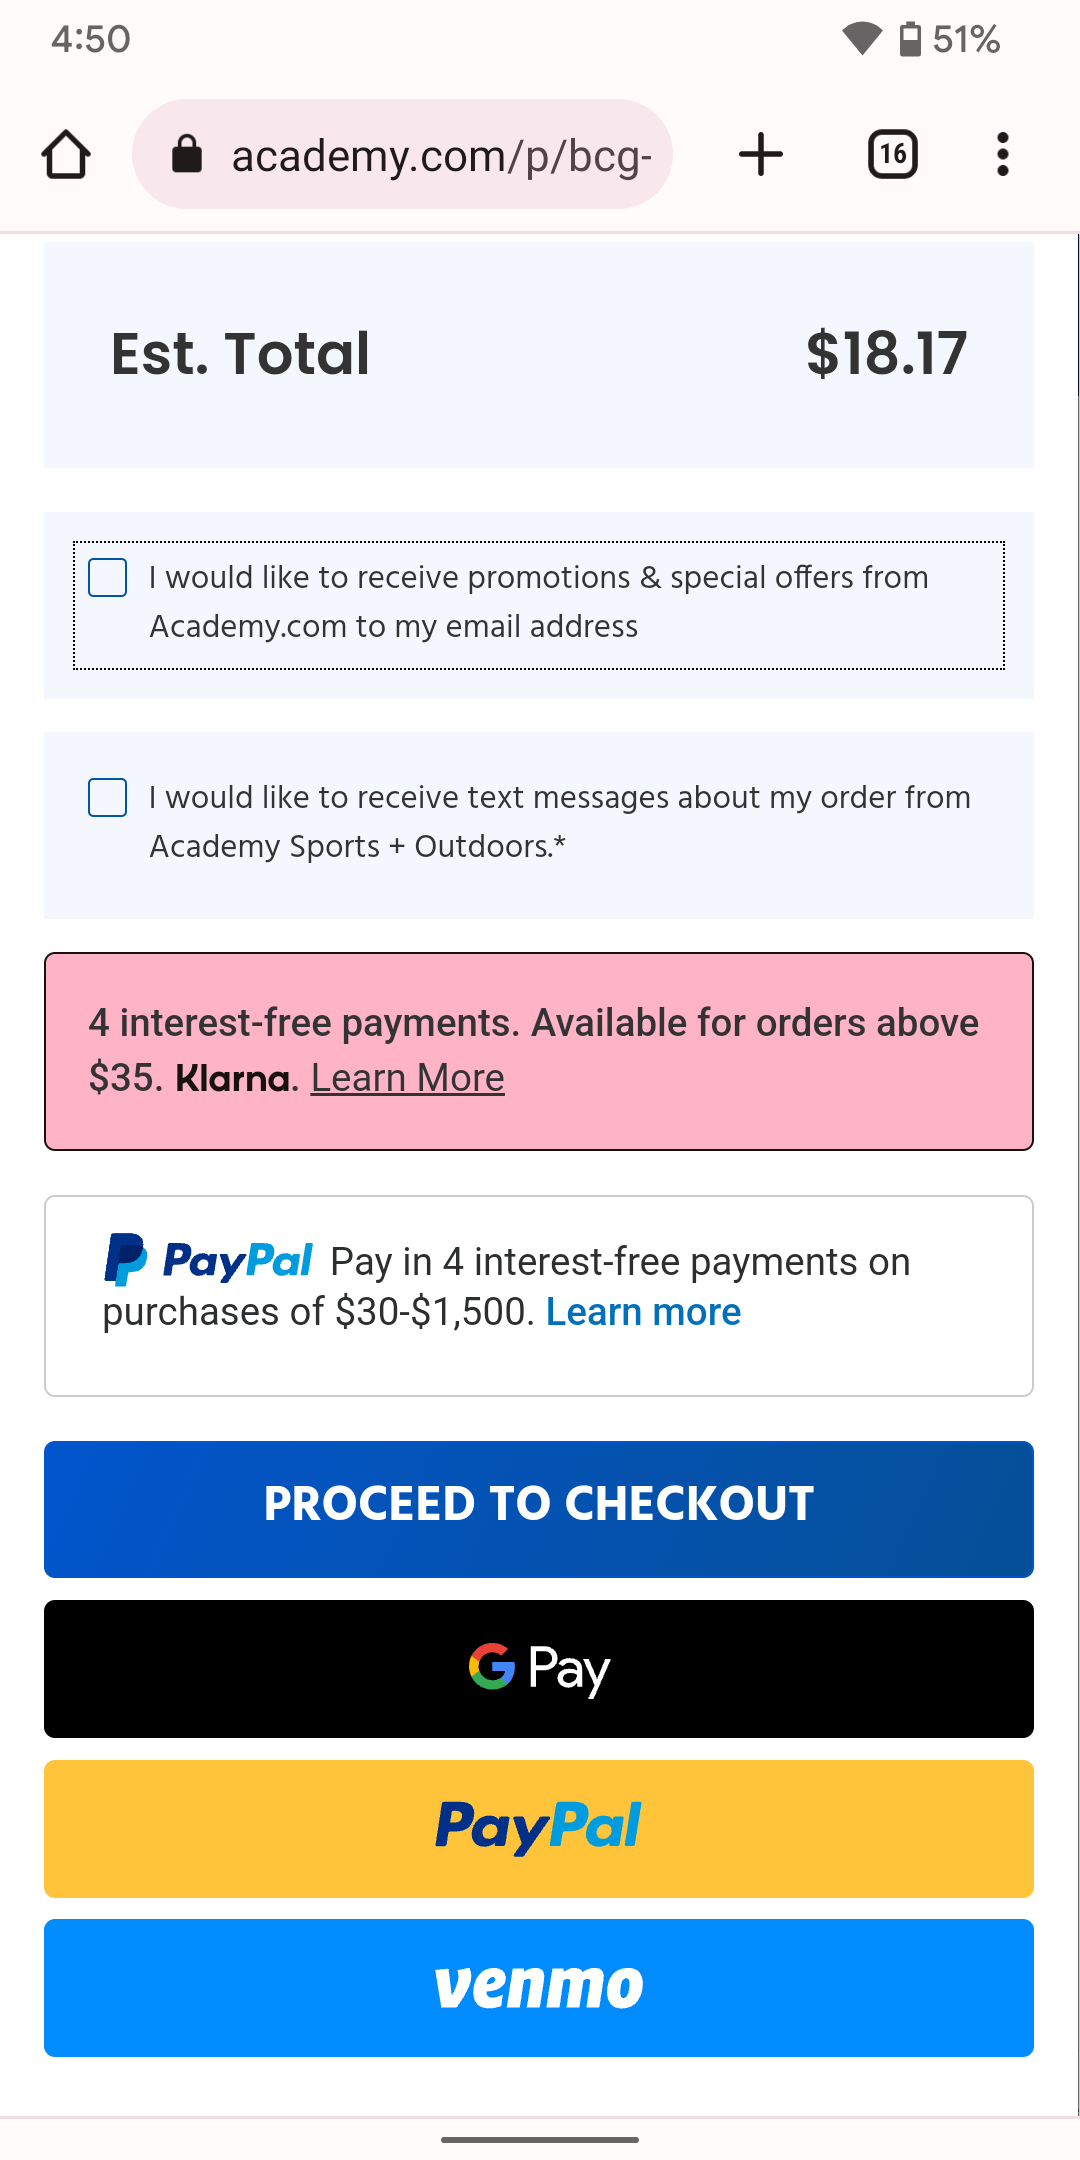 Academy Sports + Outdoors accepts Google Pay on its website.